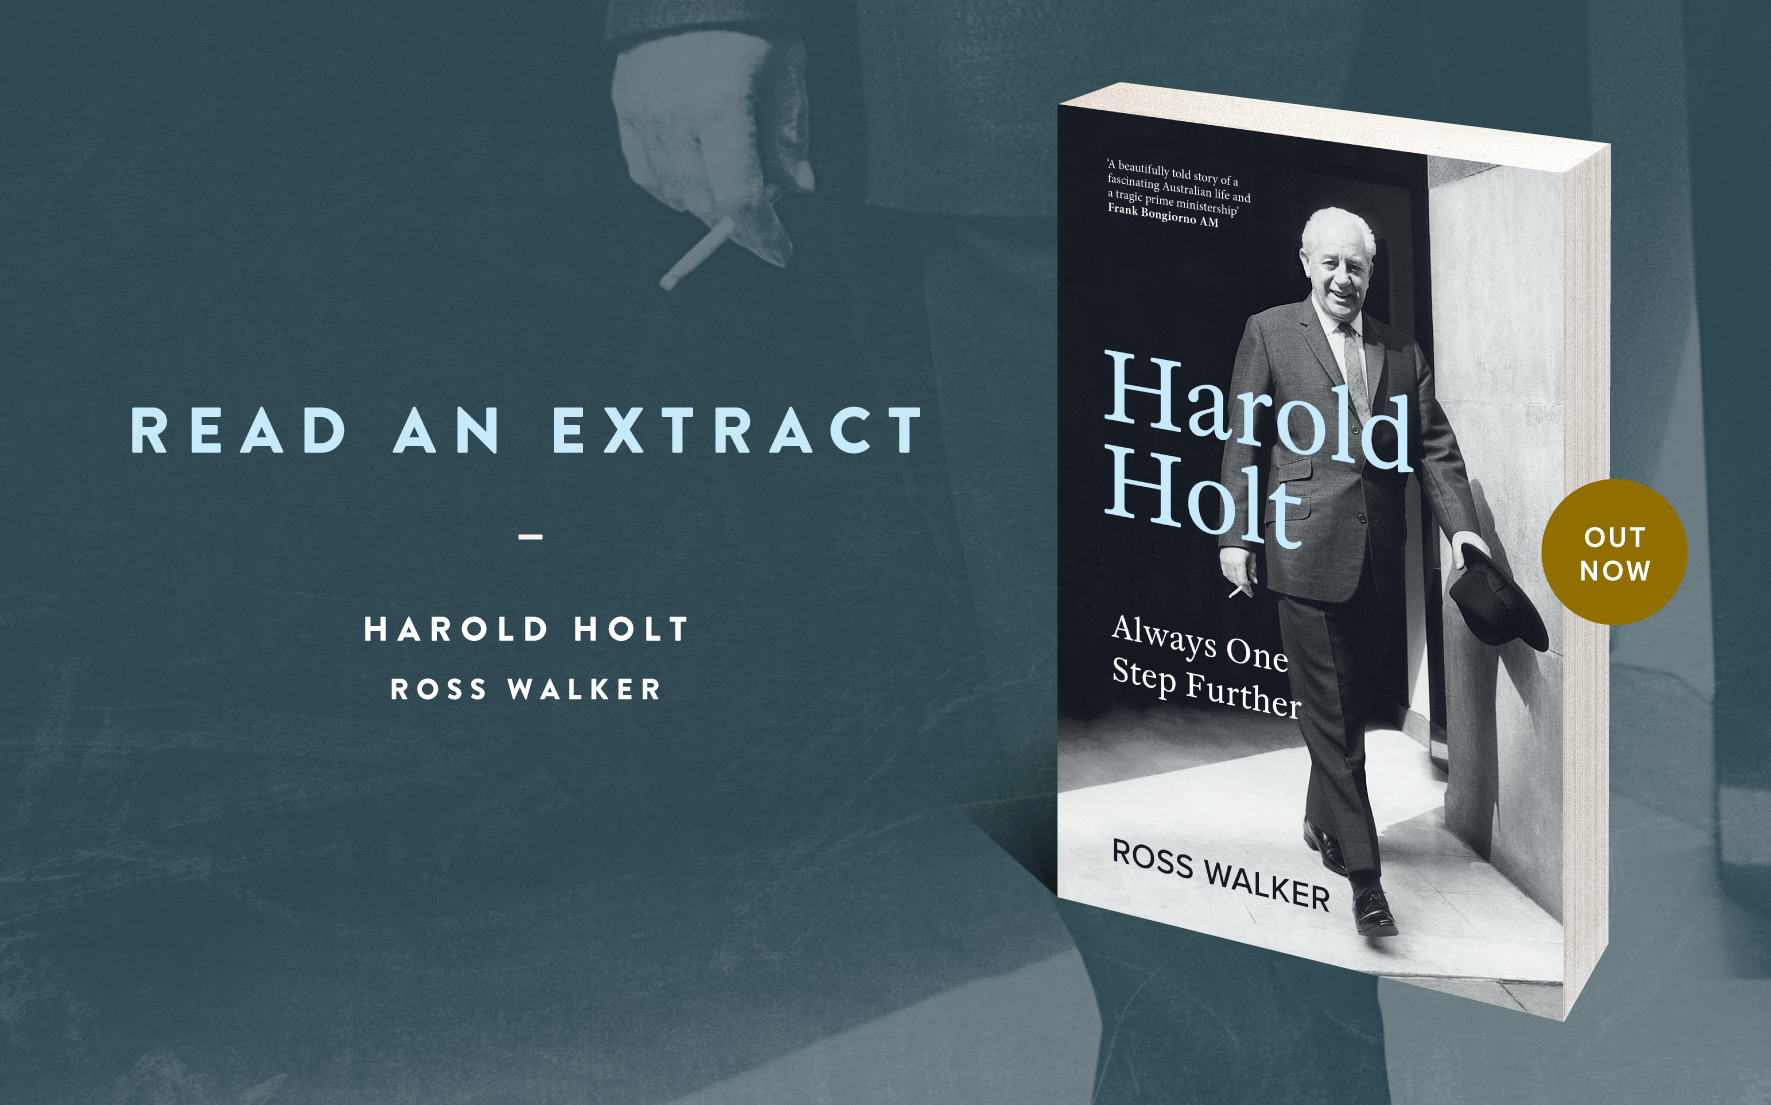 Read an extract: Harold Holt